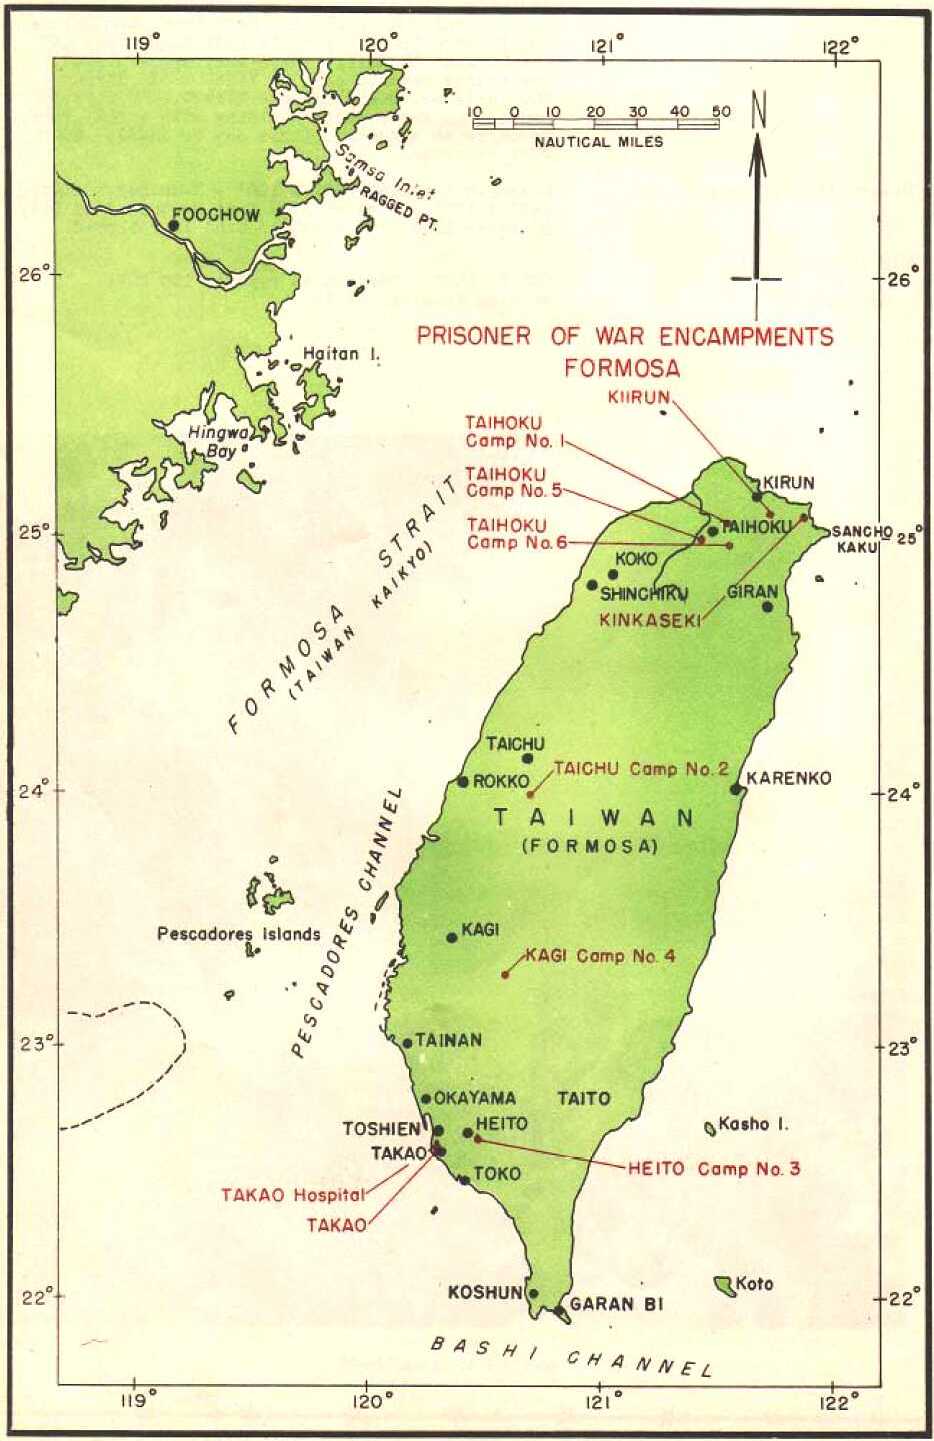 Map of Taiwan (Formosa) indicating the locations of Prisoner-of-War facilities, 1945